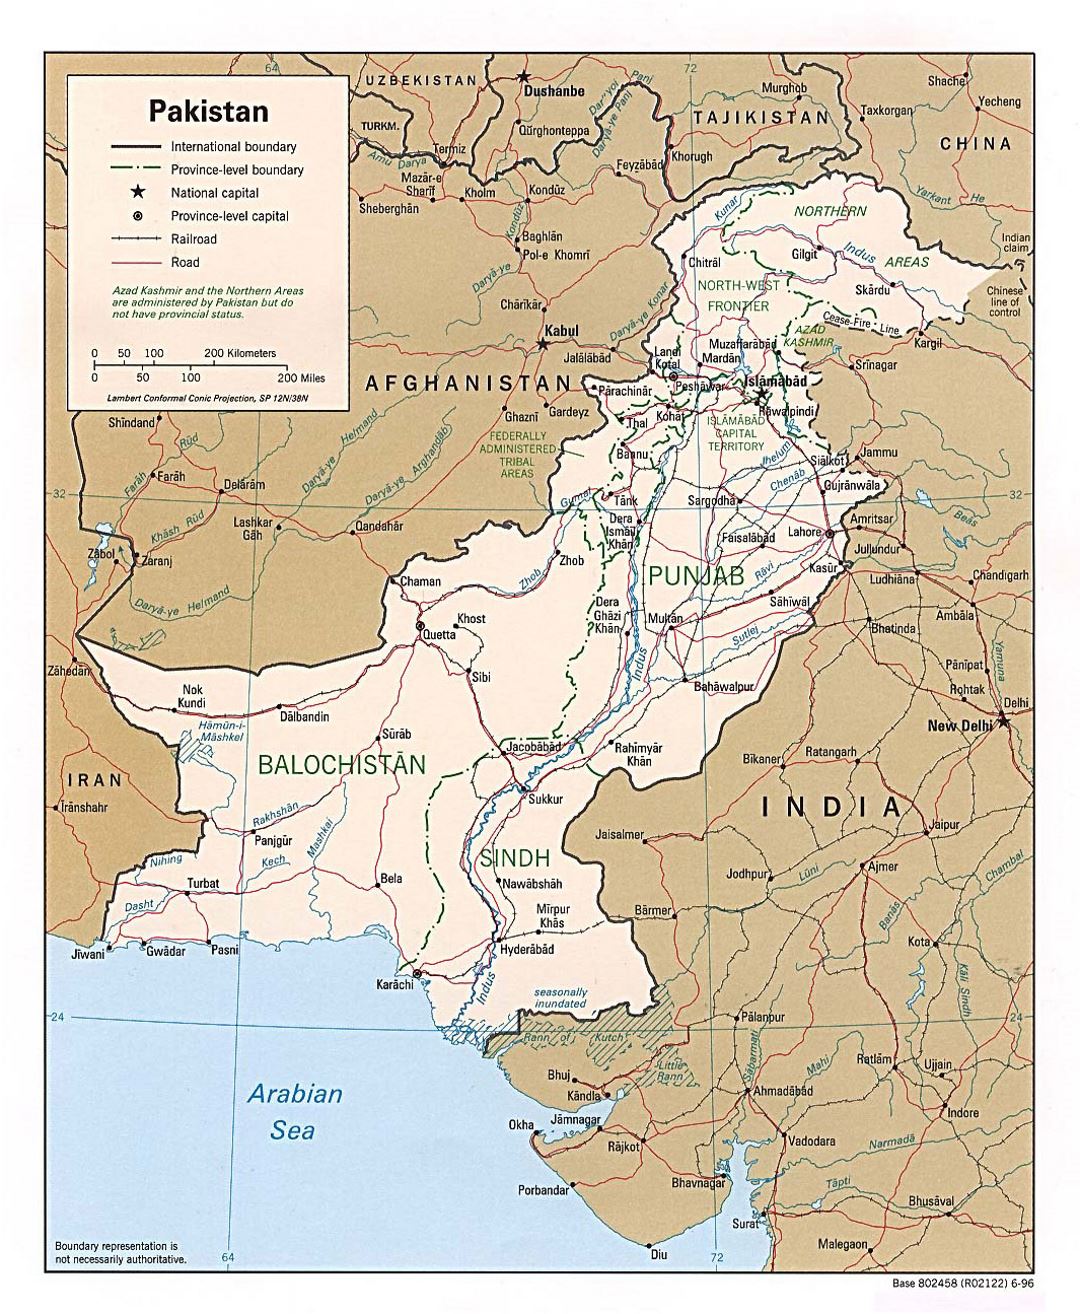 Detailed political and administrative map of Pakistan with roads, railroads and major cities - 1996